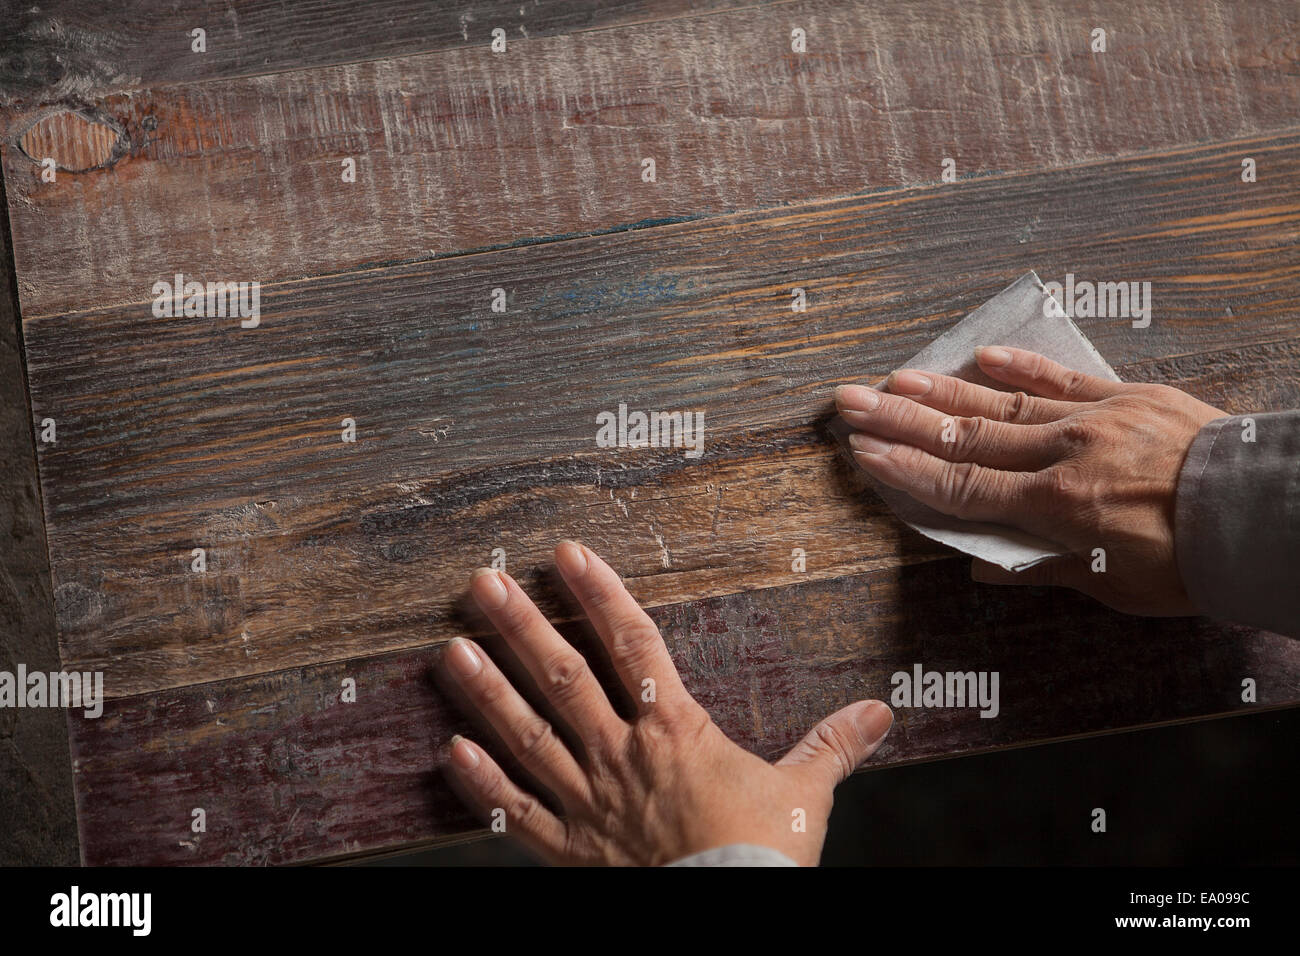 Carpenter smoothing surface of wood plank with sandpaper in factory, Jiangsu, China Stock Photo